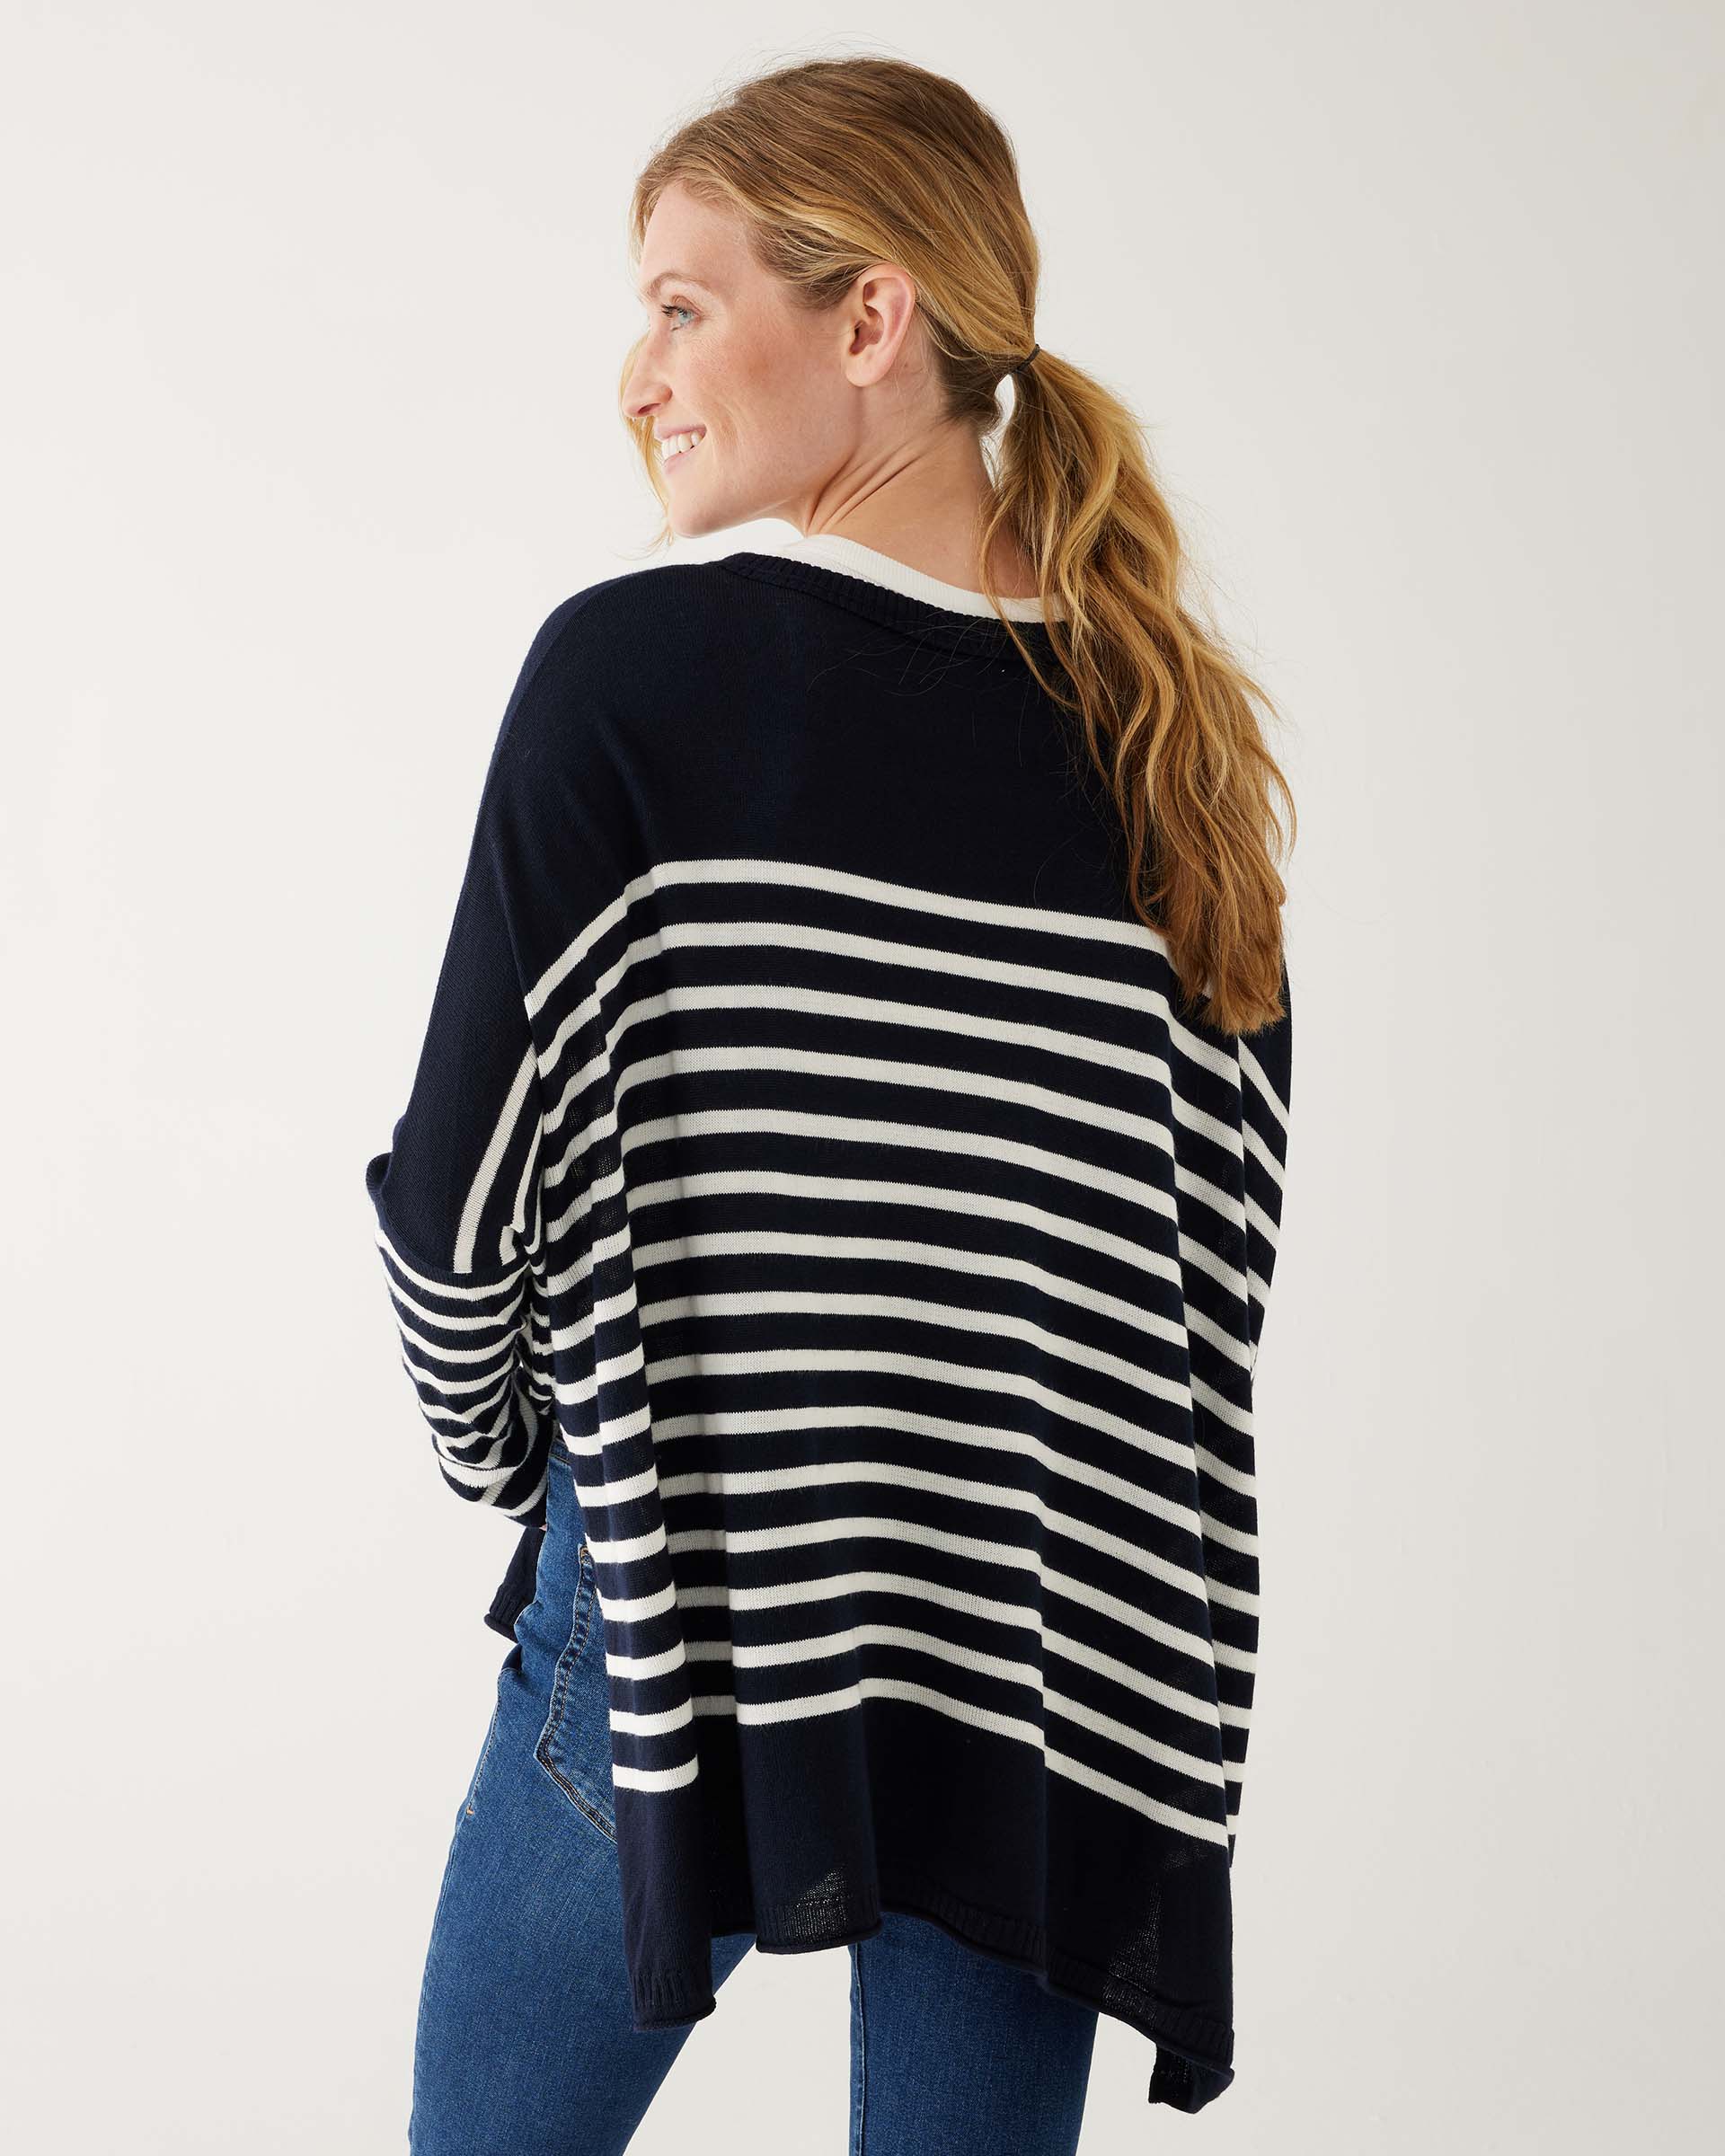 female wearing navy and white striped sweater with blue jeans backward on a white background